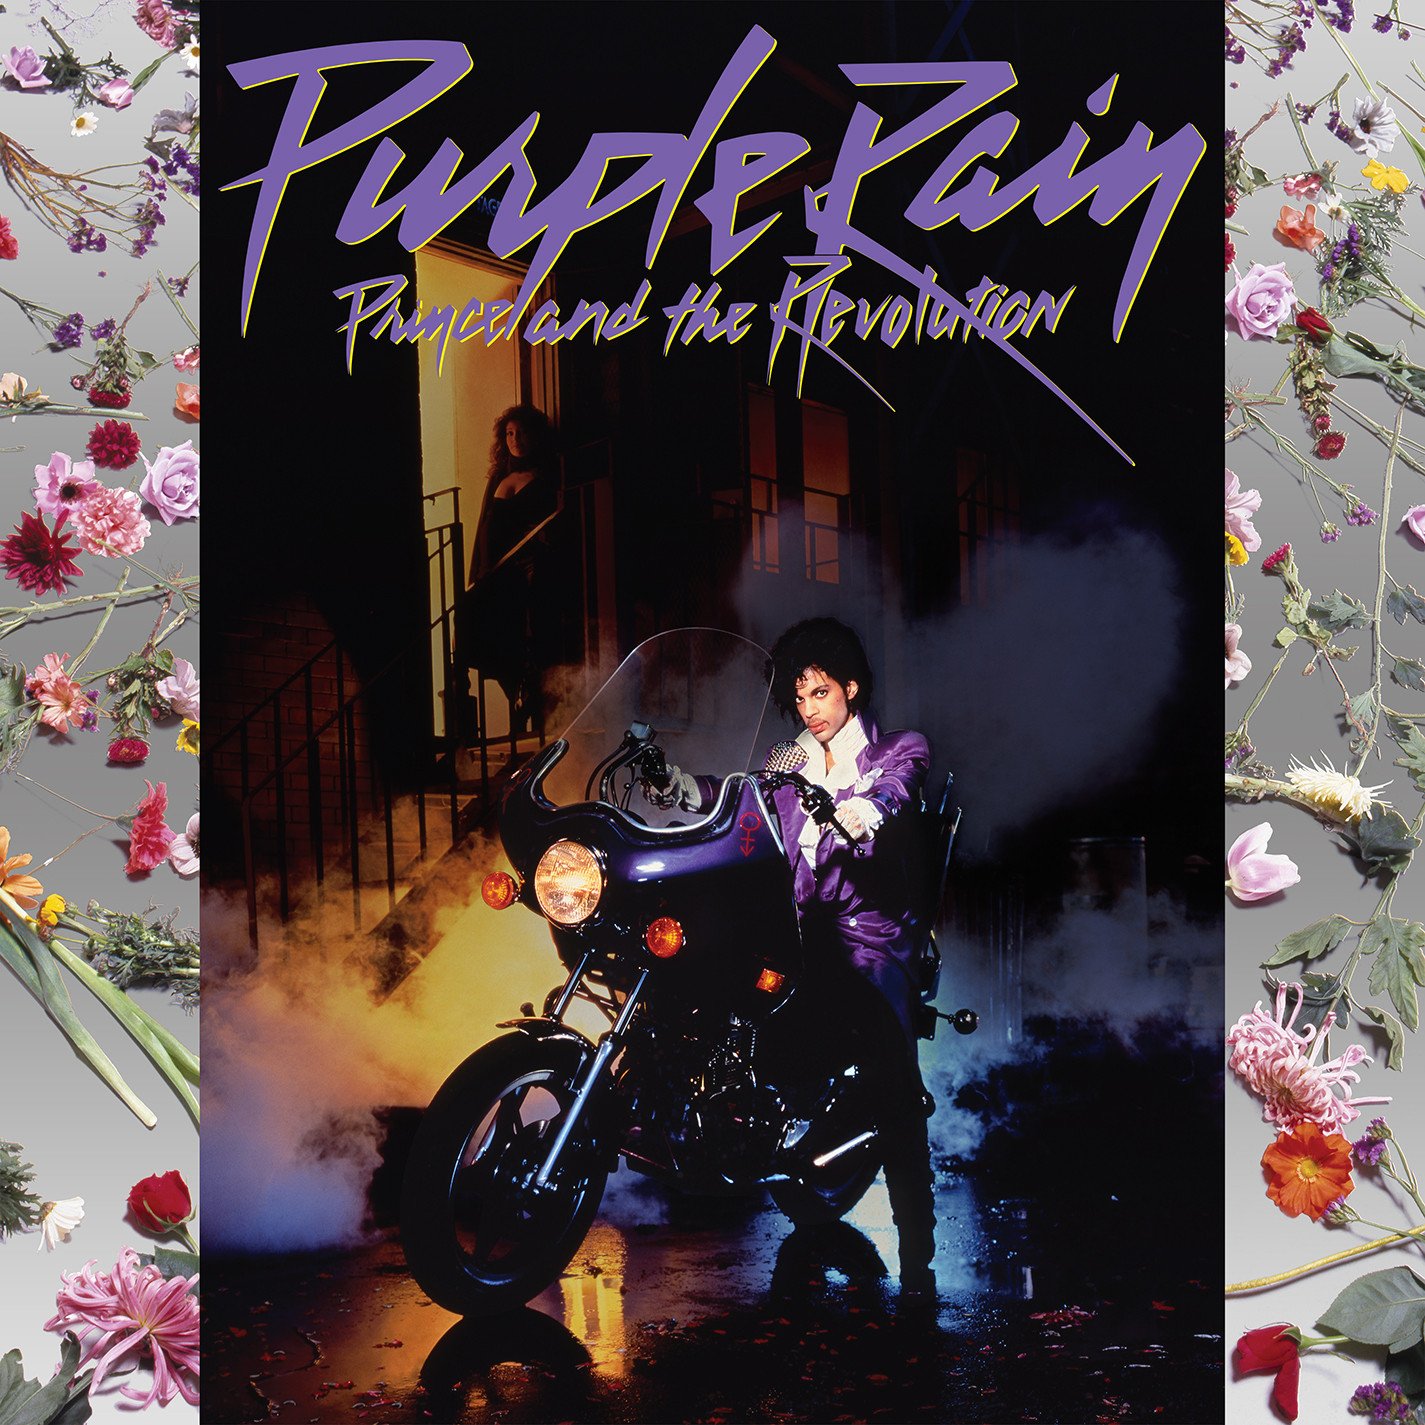 Prince - Purple Rain (Deluxe Expanded Edition) (2017) 24bit FLAC Download